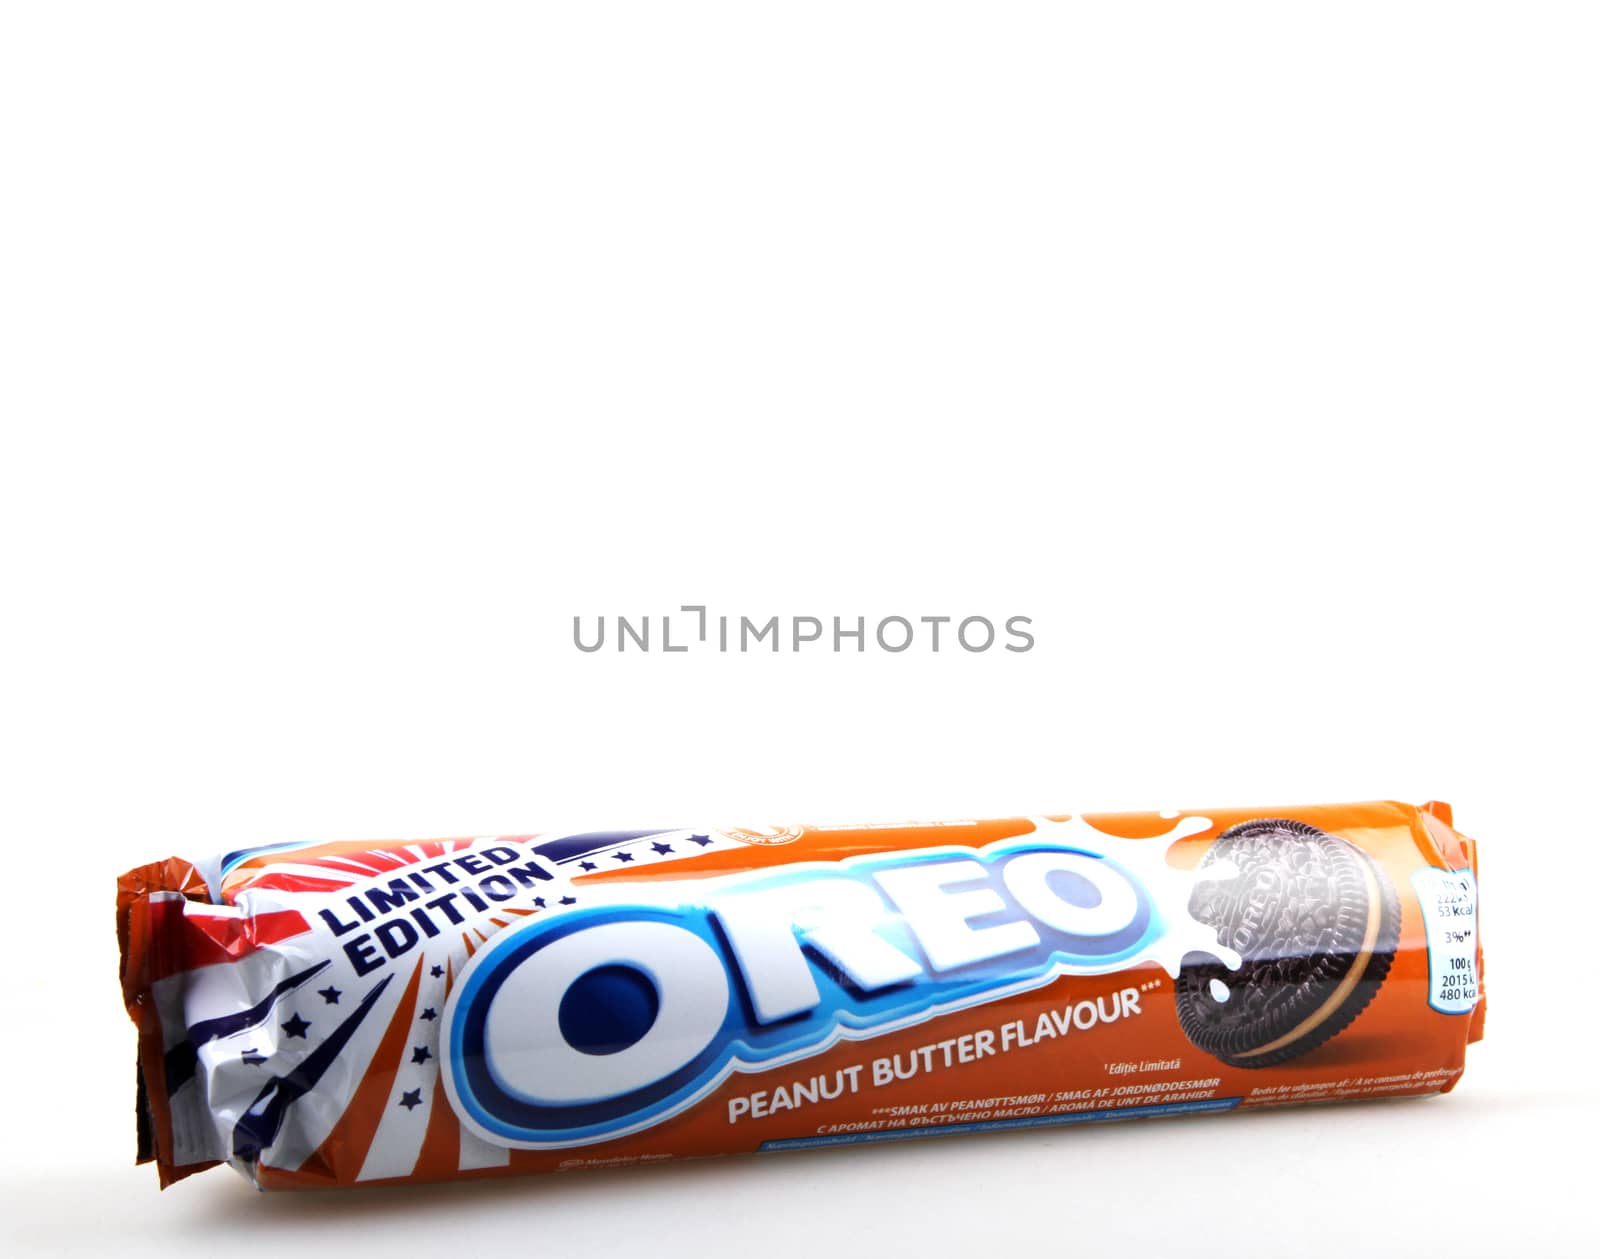 AYTOS, BULGARIA - MARCH 12, 2016: Oreo isolated on white background. Oreo is a sandwich cookie consisting of two chocolate disks with a sweet cream filling in between. by nenov